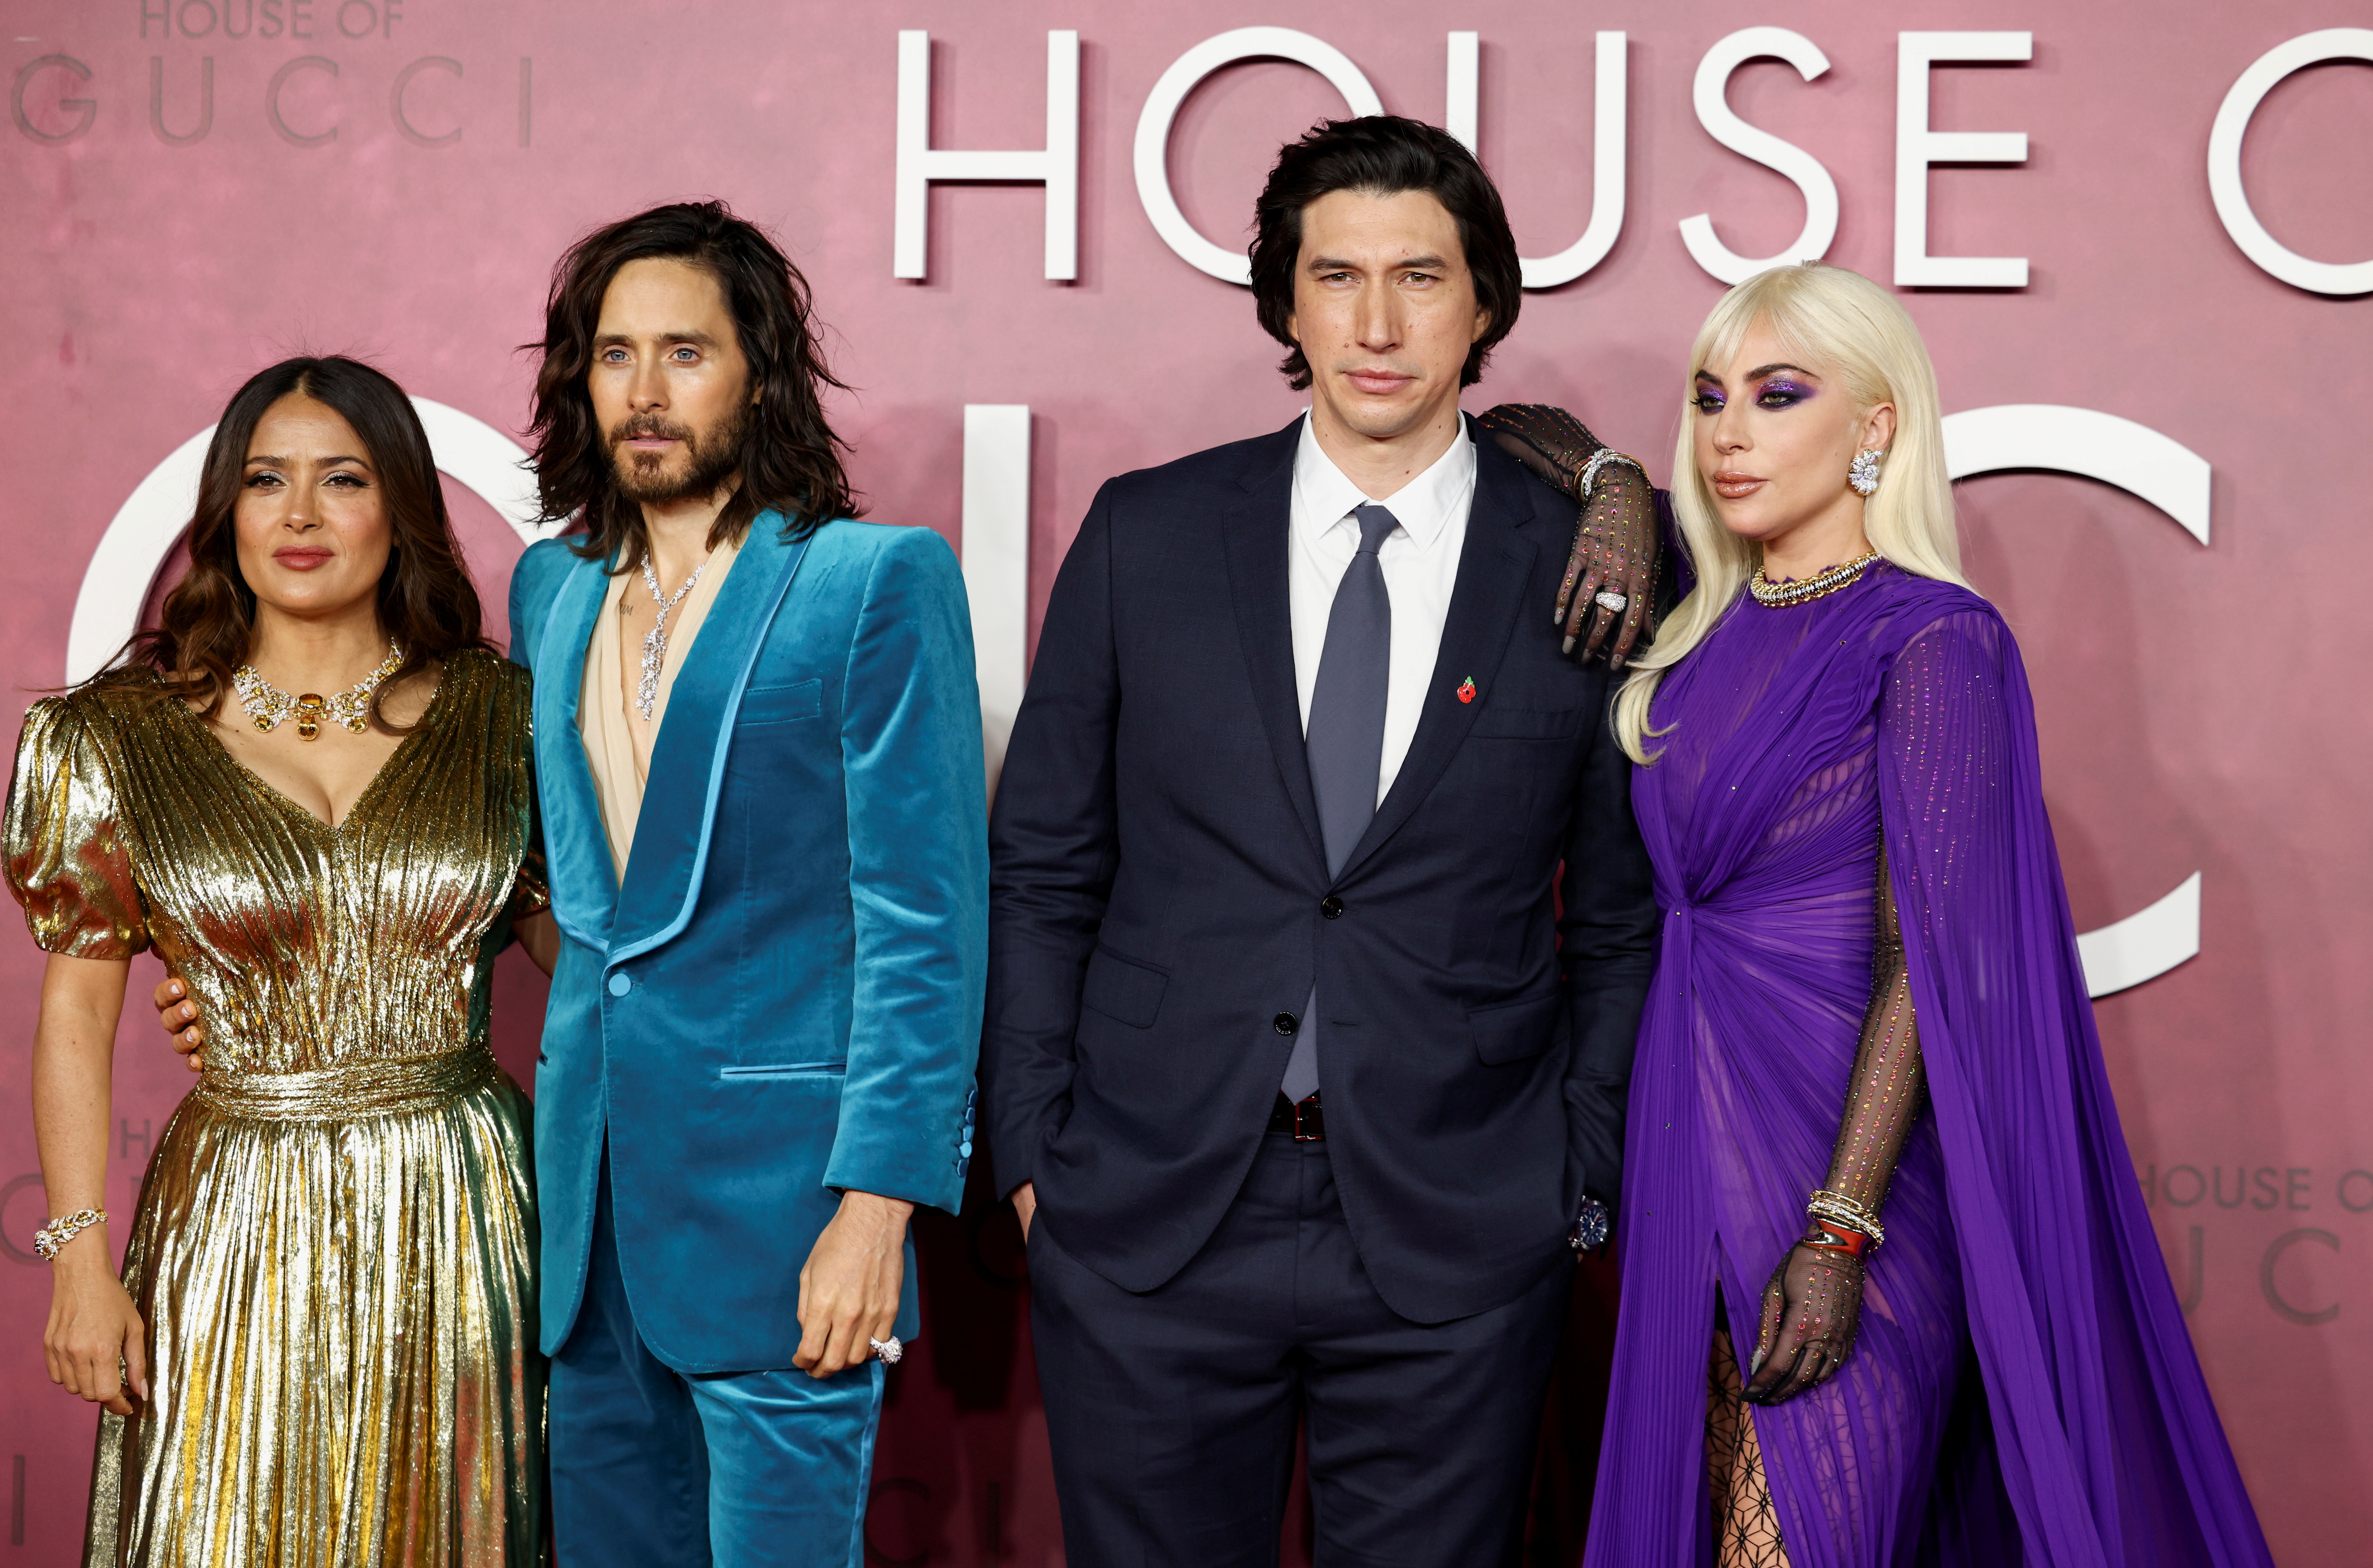 FILE PHOTO: Cast members Salma Hayek, Jared Leto, Adam Driver, and Lady Gaga arrive at the UK Premiere of the film 'House of Gucci' at Leicester Square in London, Britain, November 9, 2021. REUTERS/Henry Nicholls/File Photo